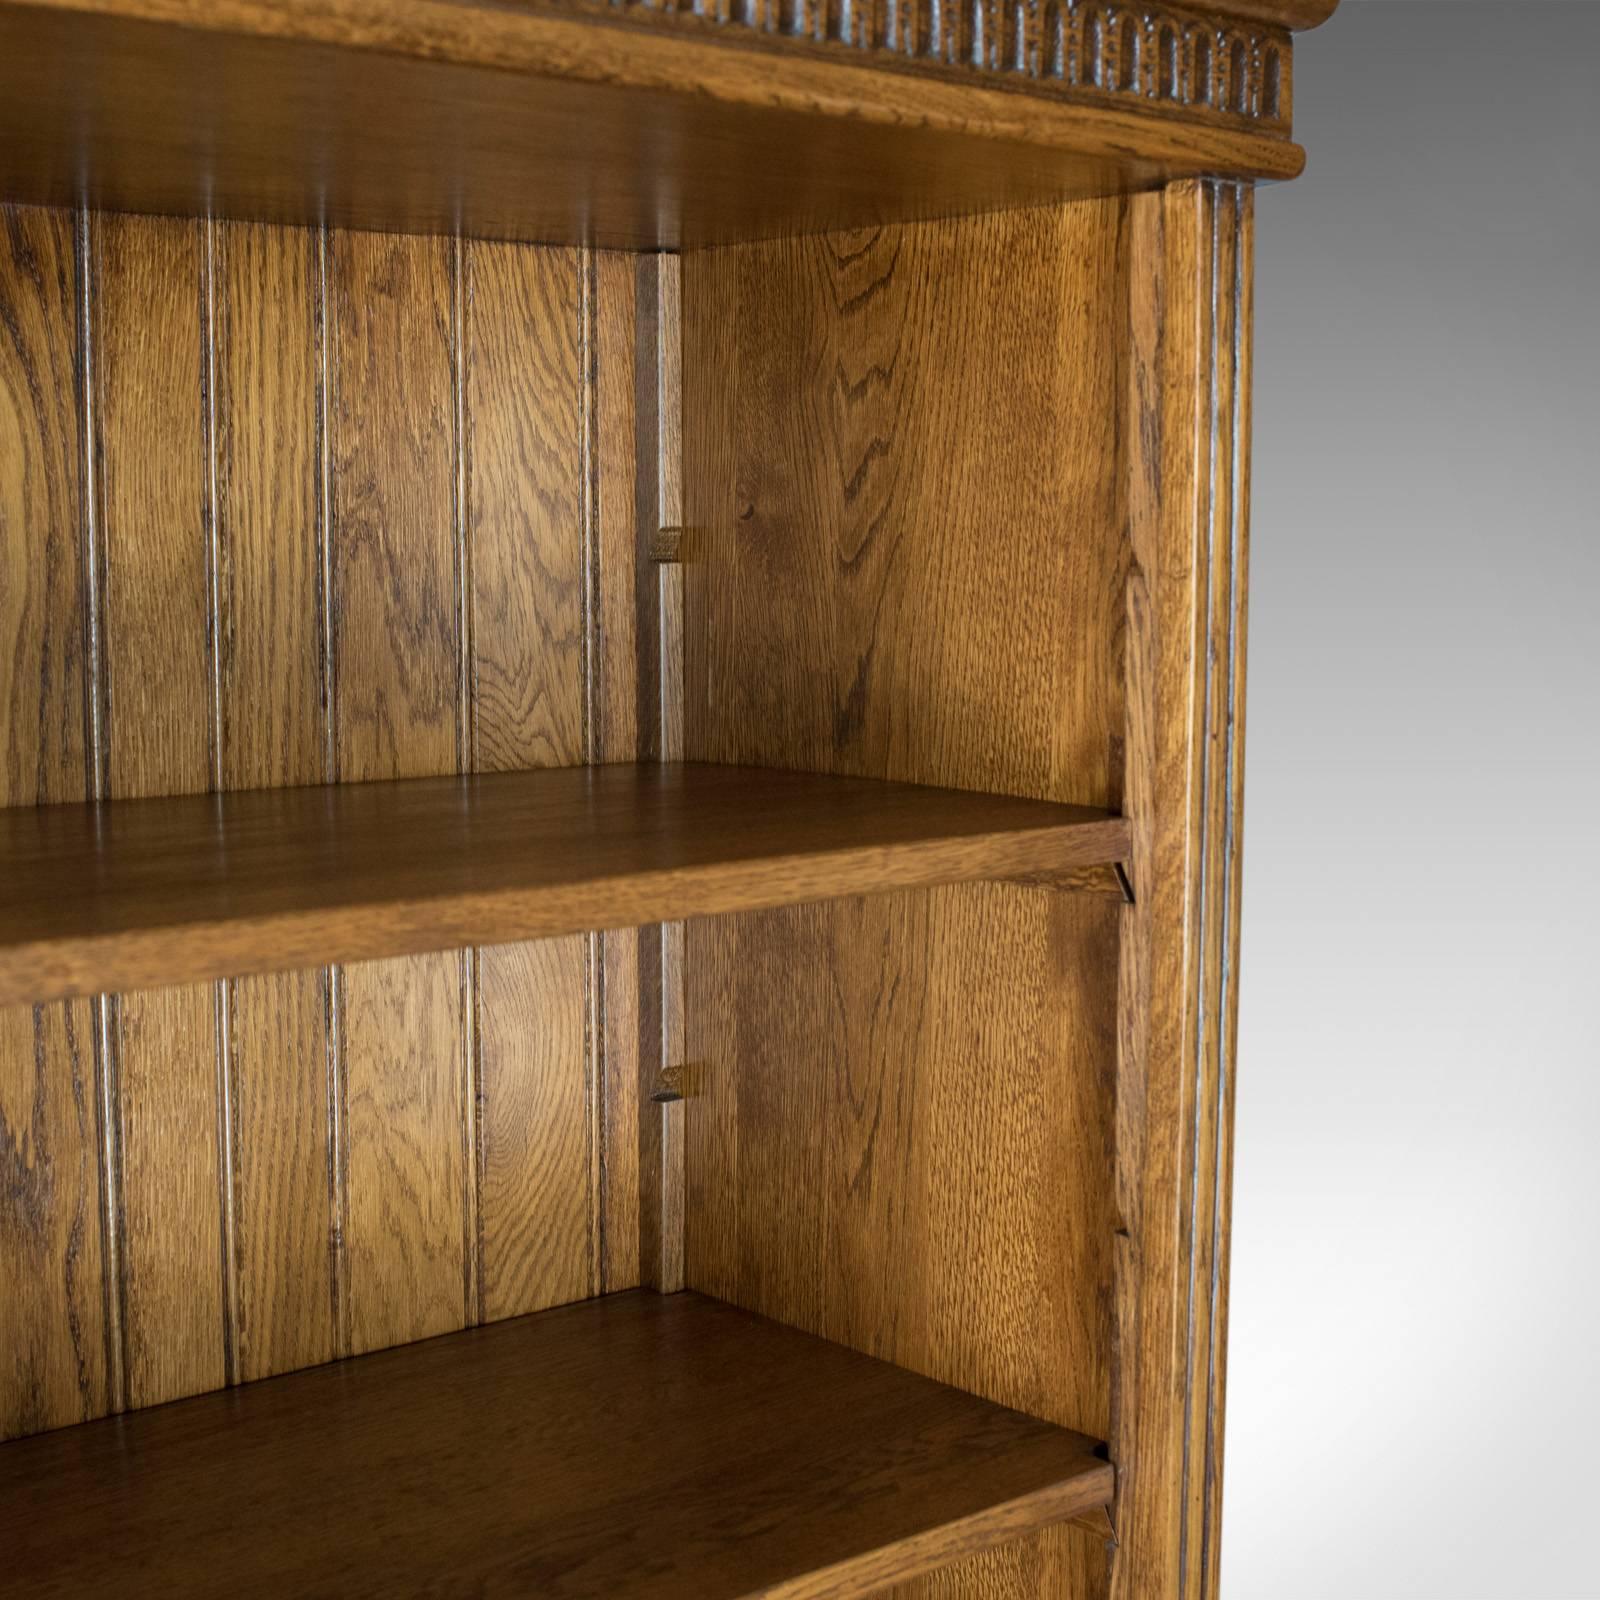 English Mid-Sized, Tall, Open Bookcase, Oak, Gothic Overtones 20th Century